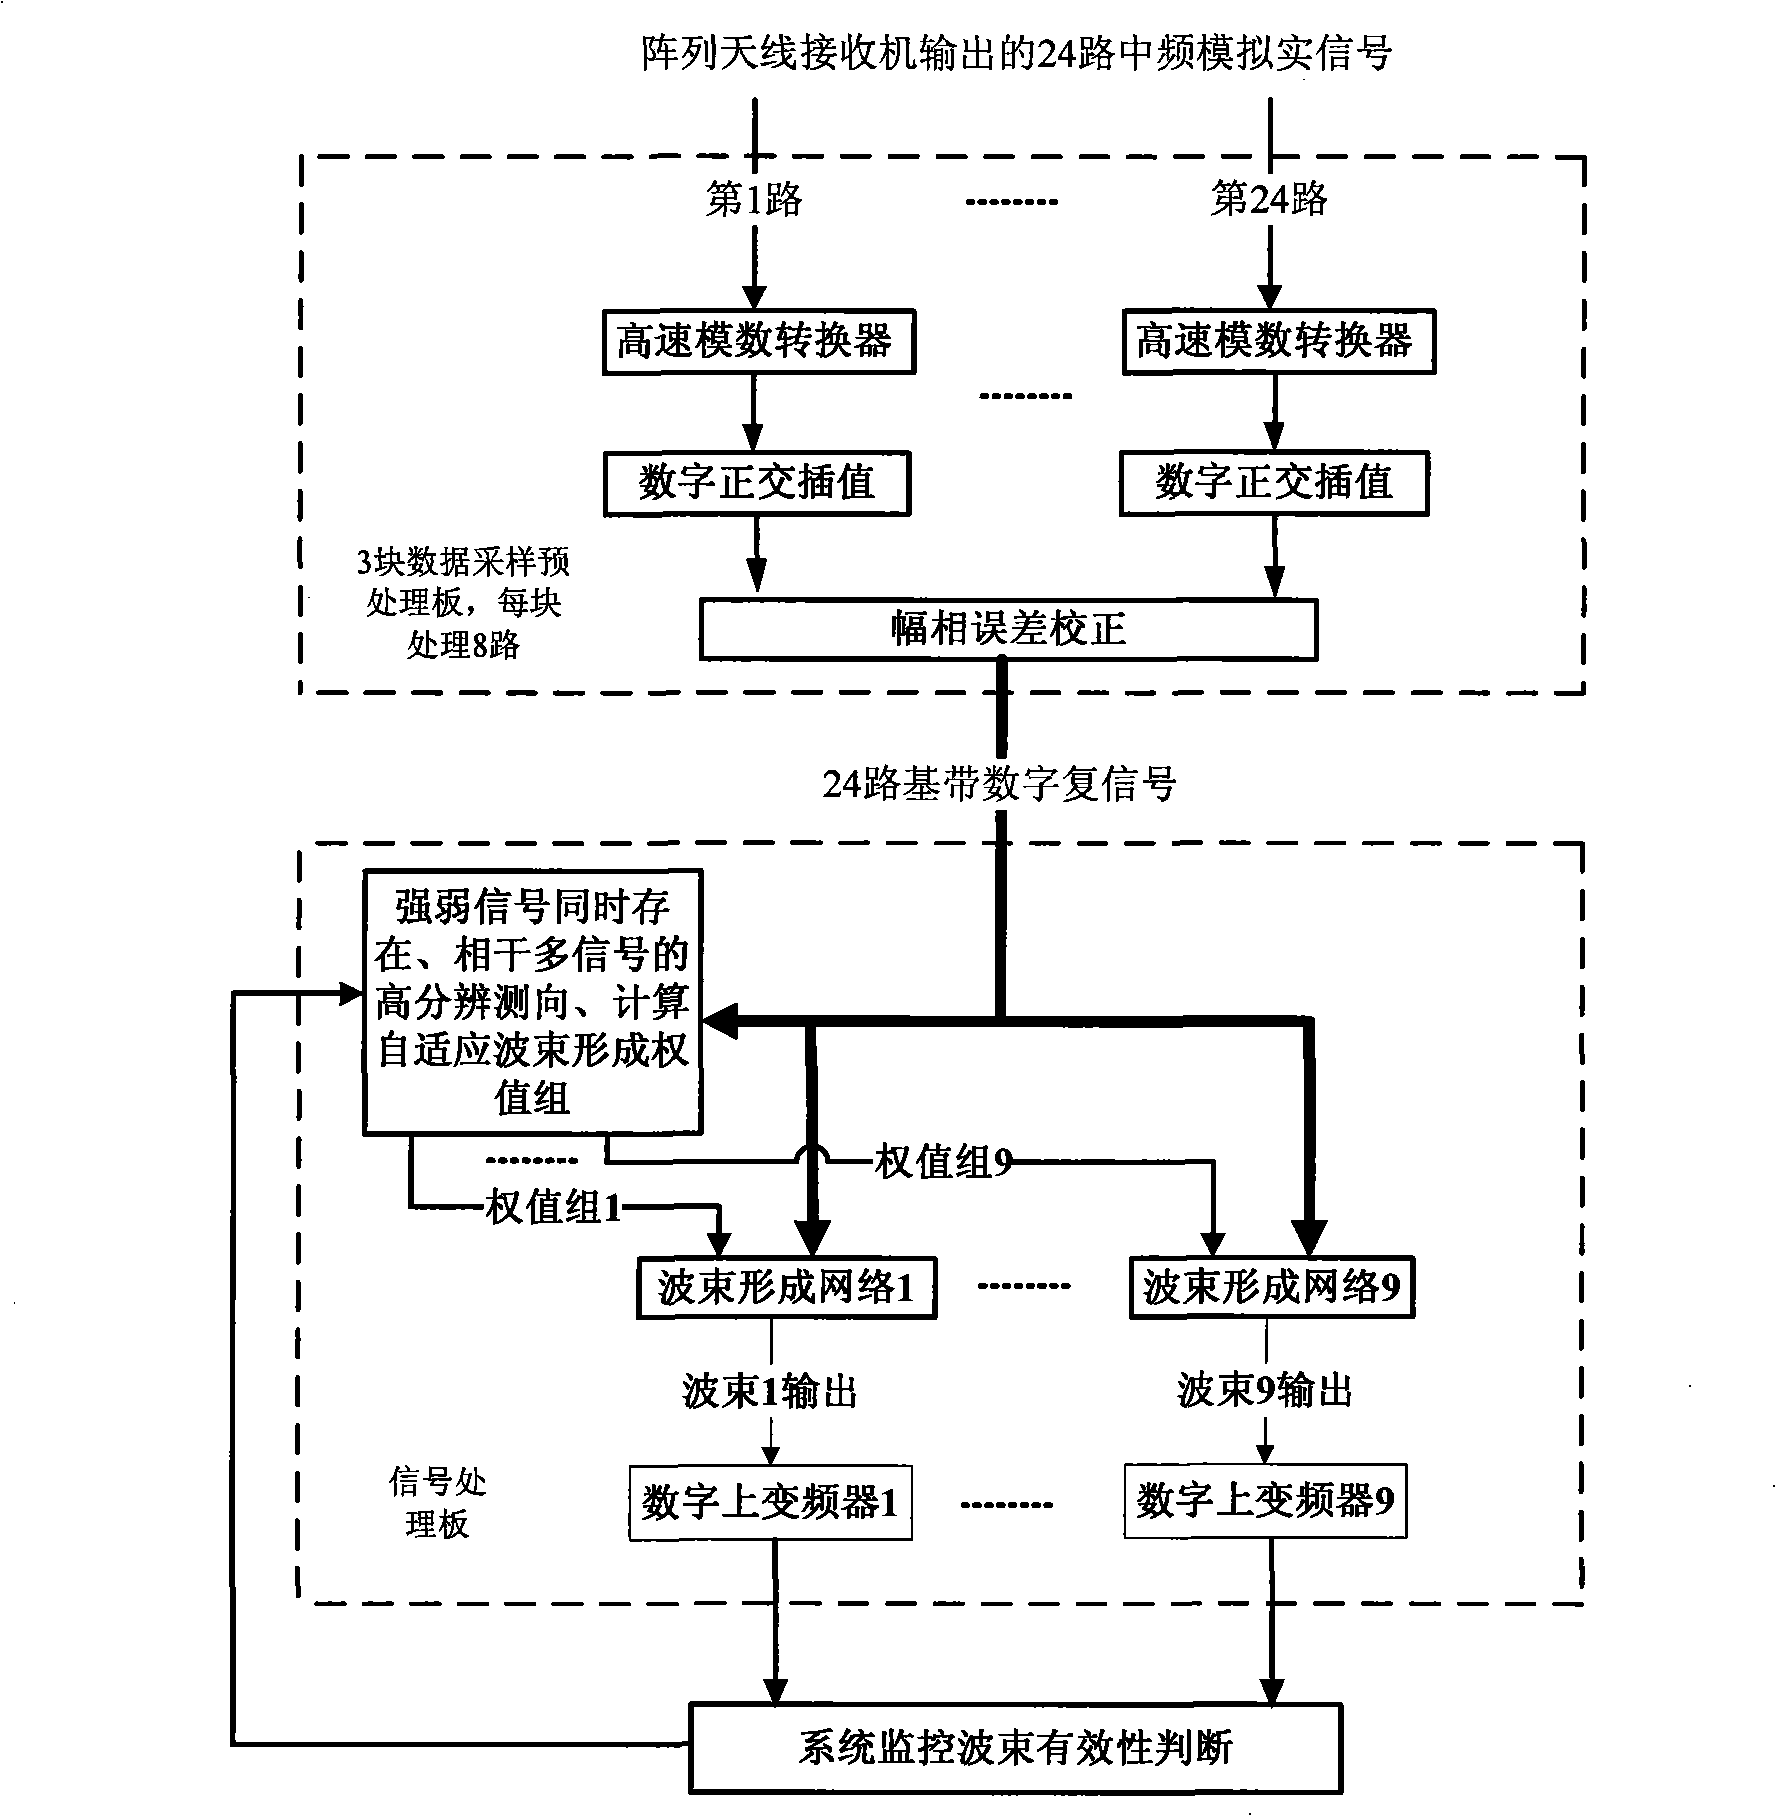 Phased array digital multi-beam forming machine for electron reconnaissance